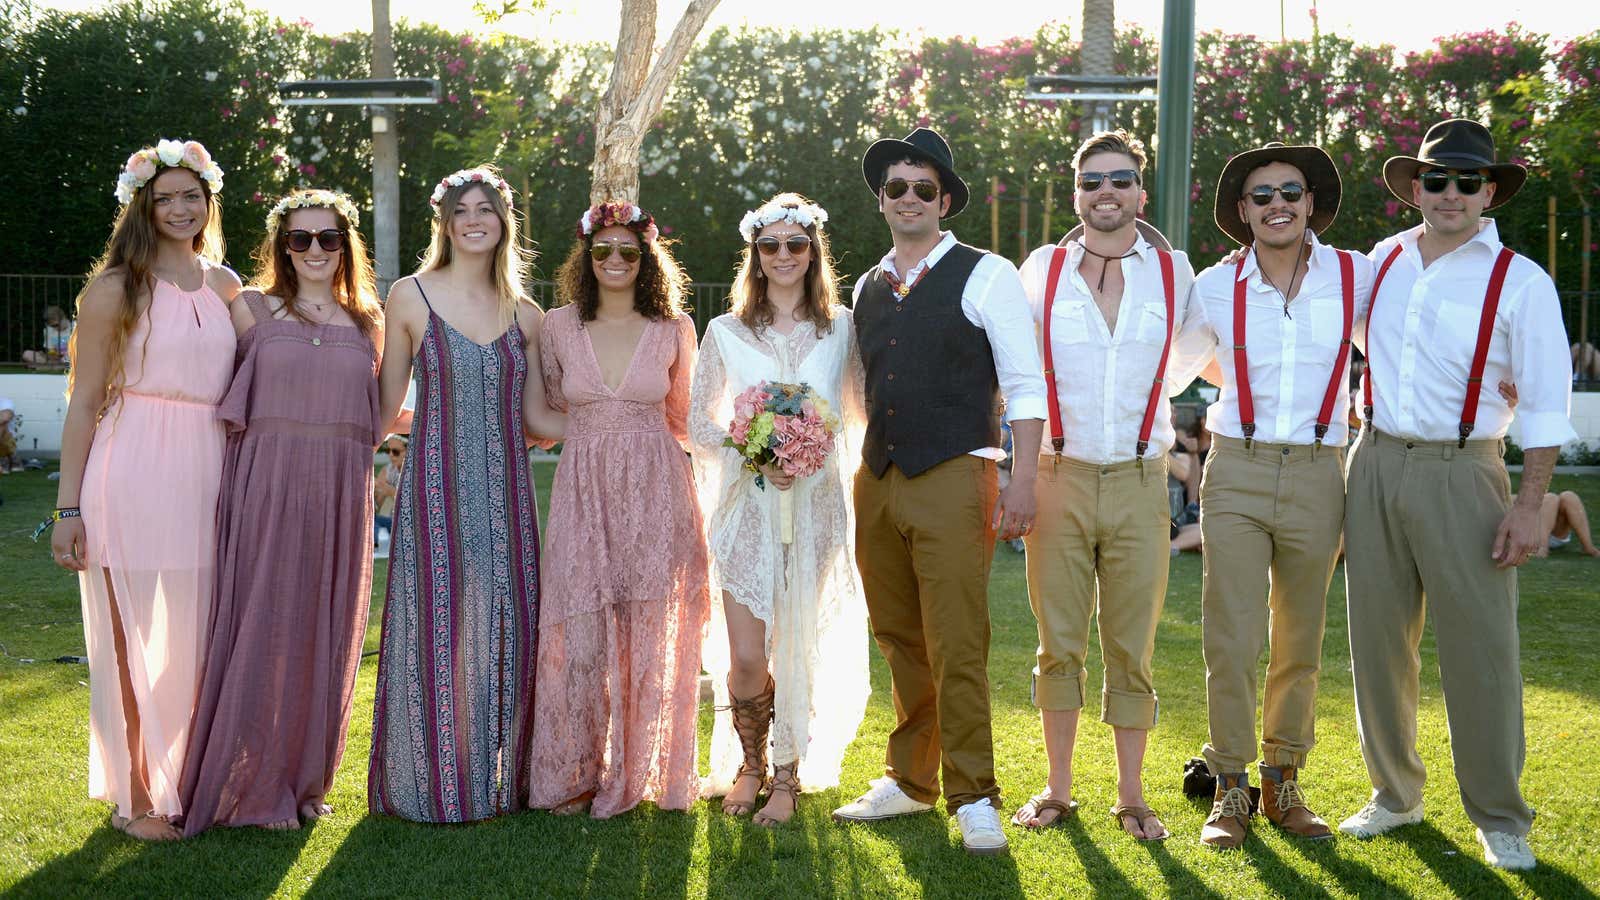 These people got married at Coachella.